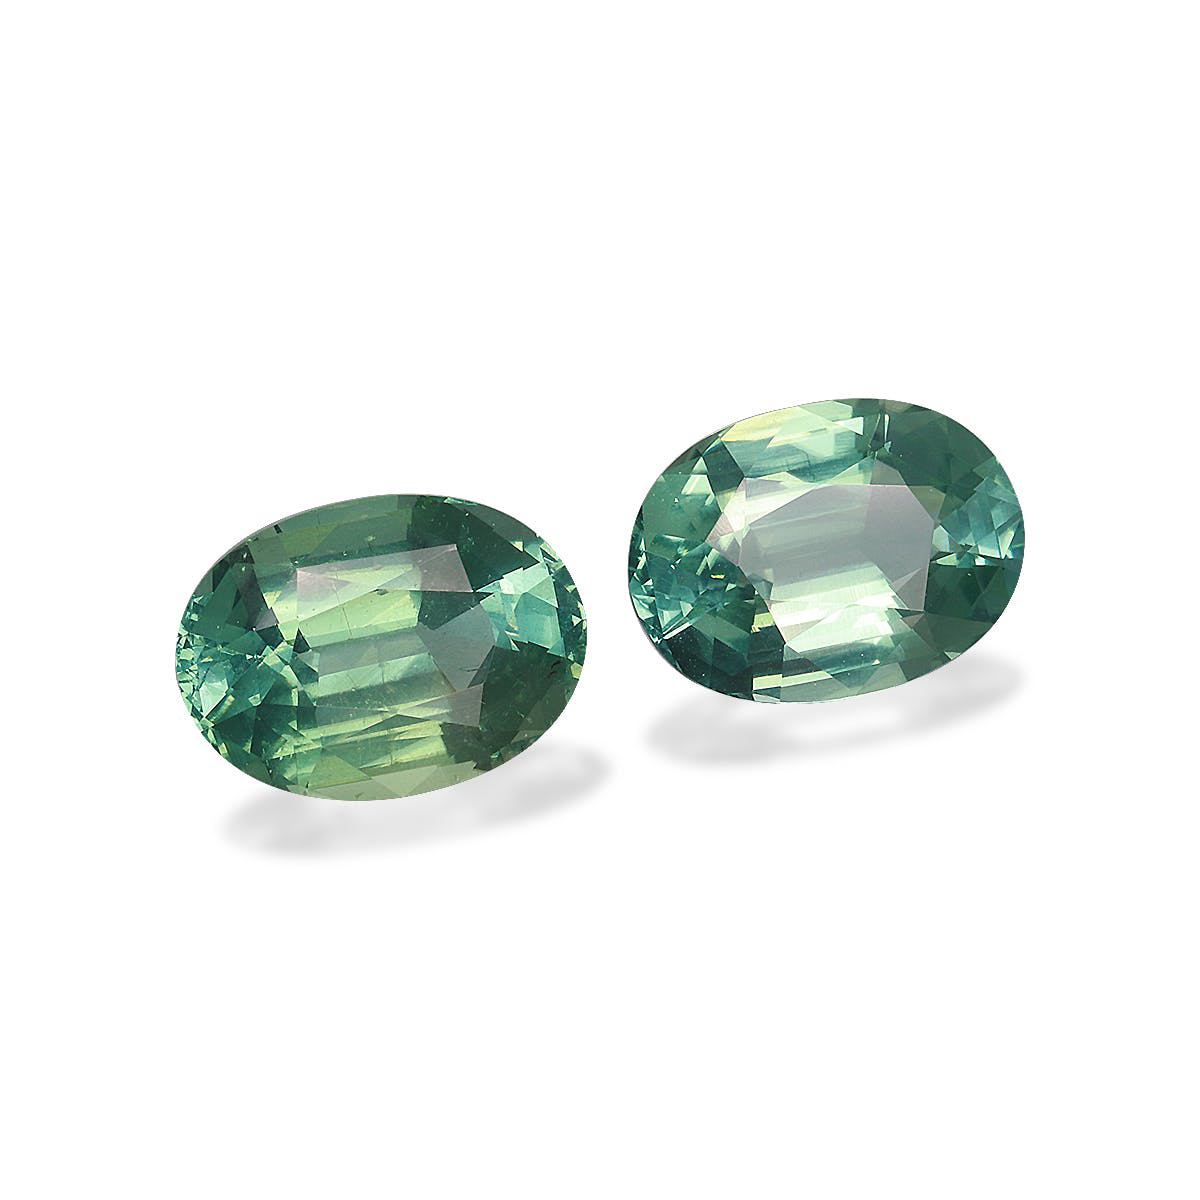 Picture of Green Tourmaline 13.07ct - Pair (TG0690)